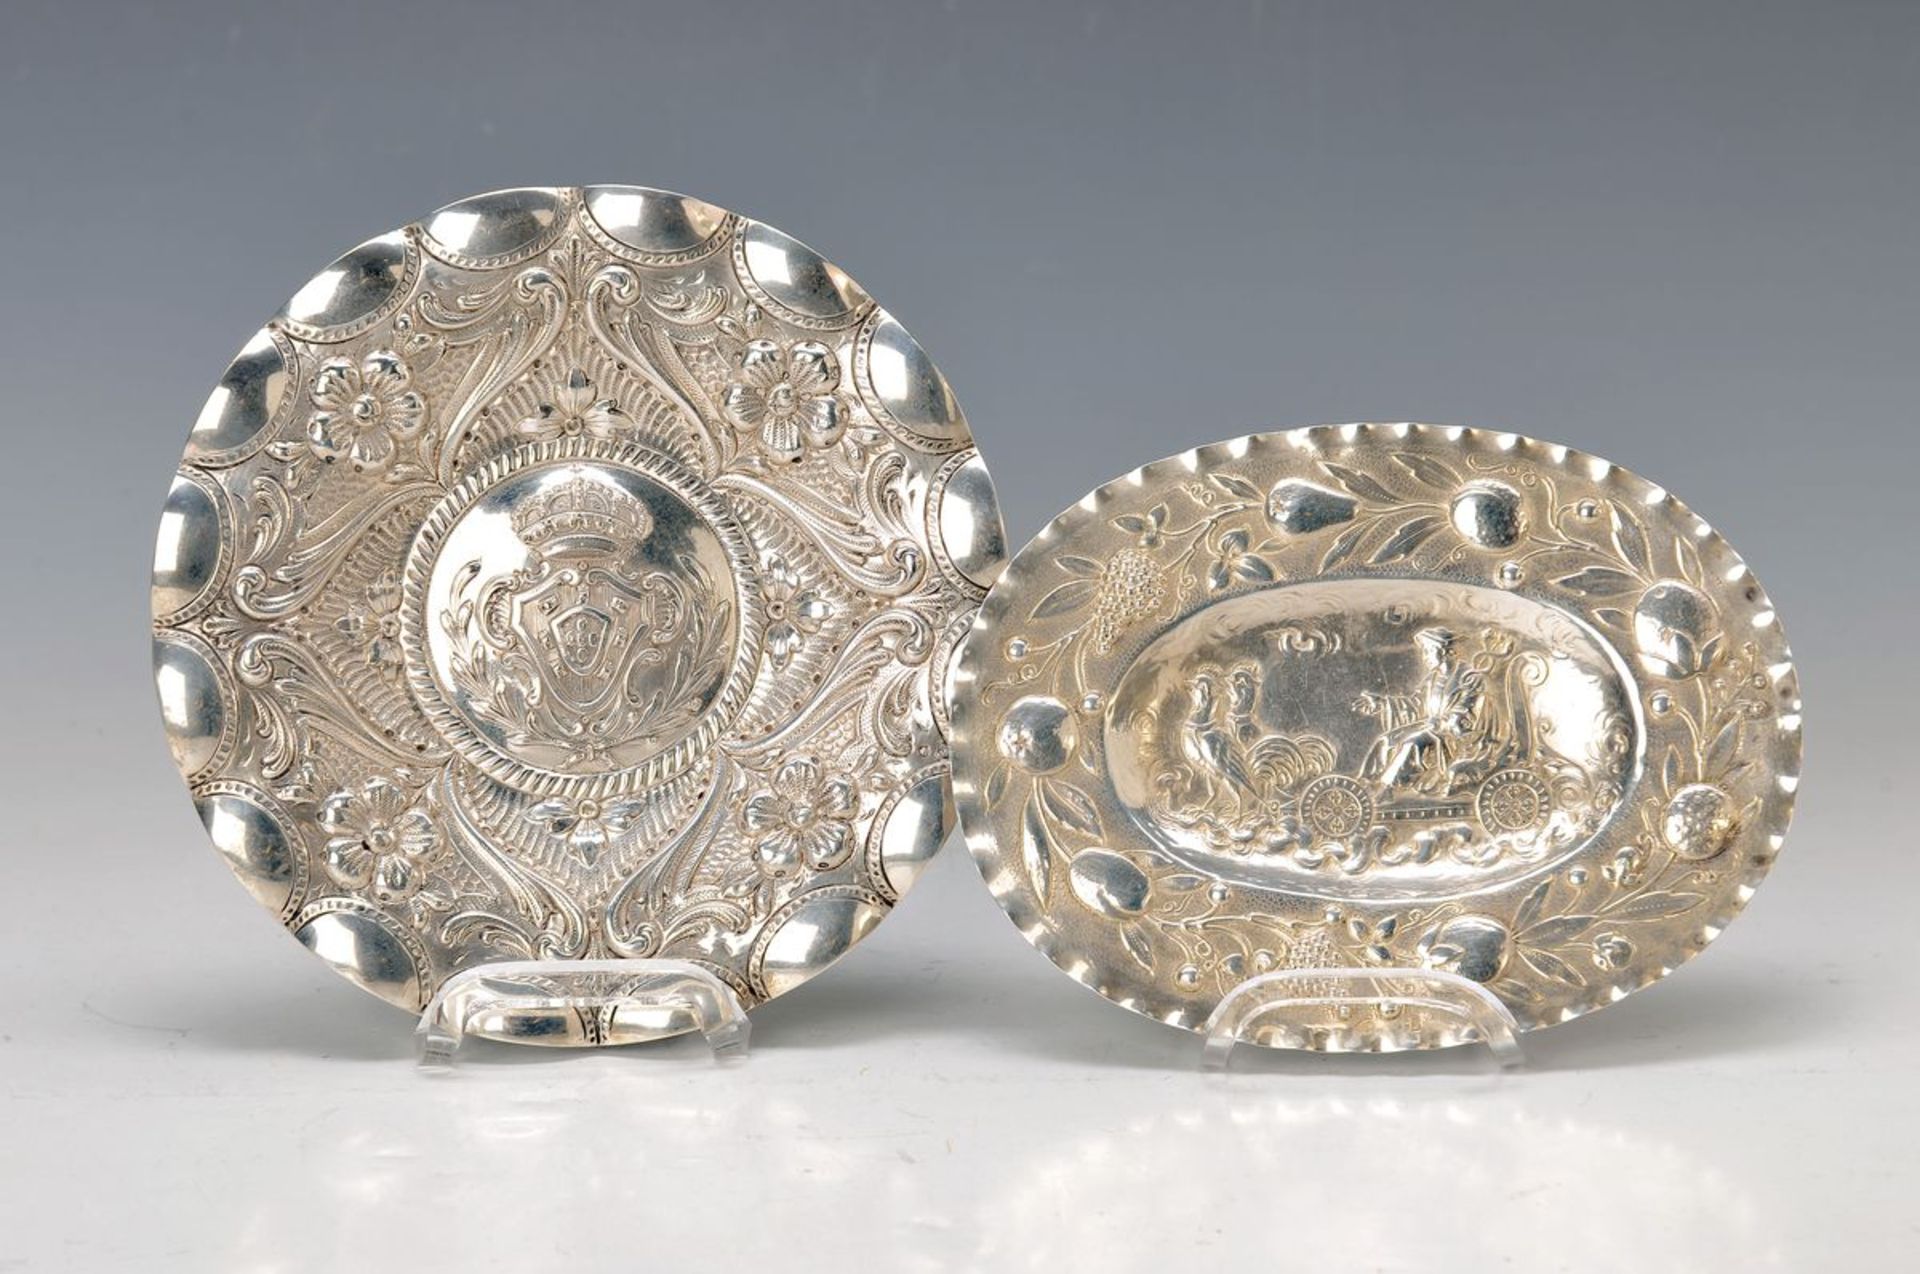 two small historism plates, silver, 1x Neresheim after Augsburg antetype, pure handicraft, 16 x 12